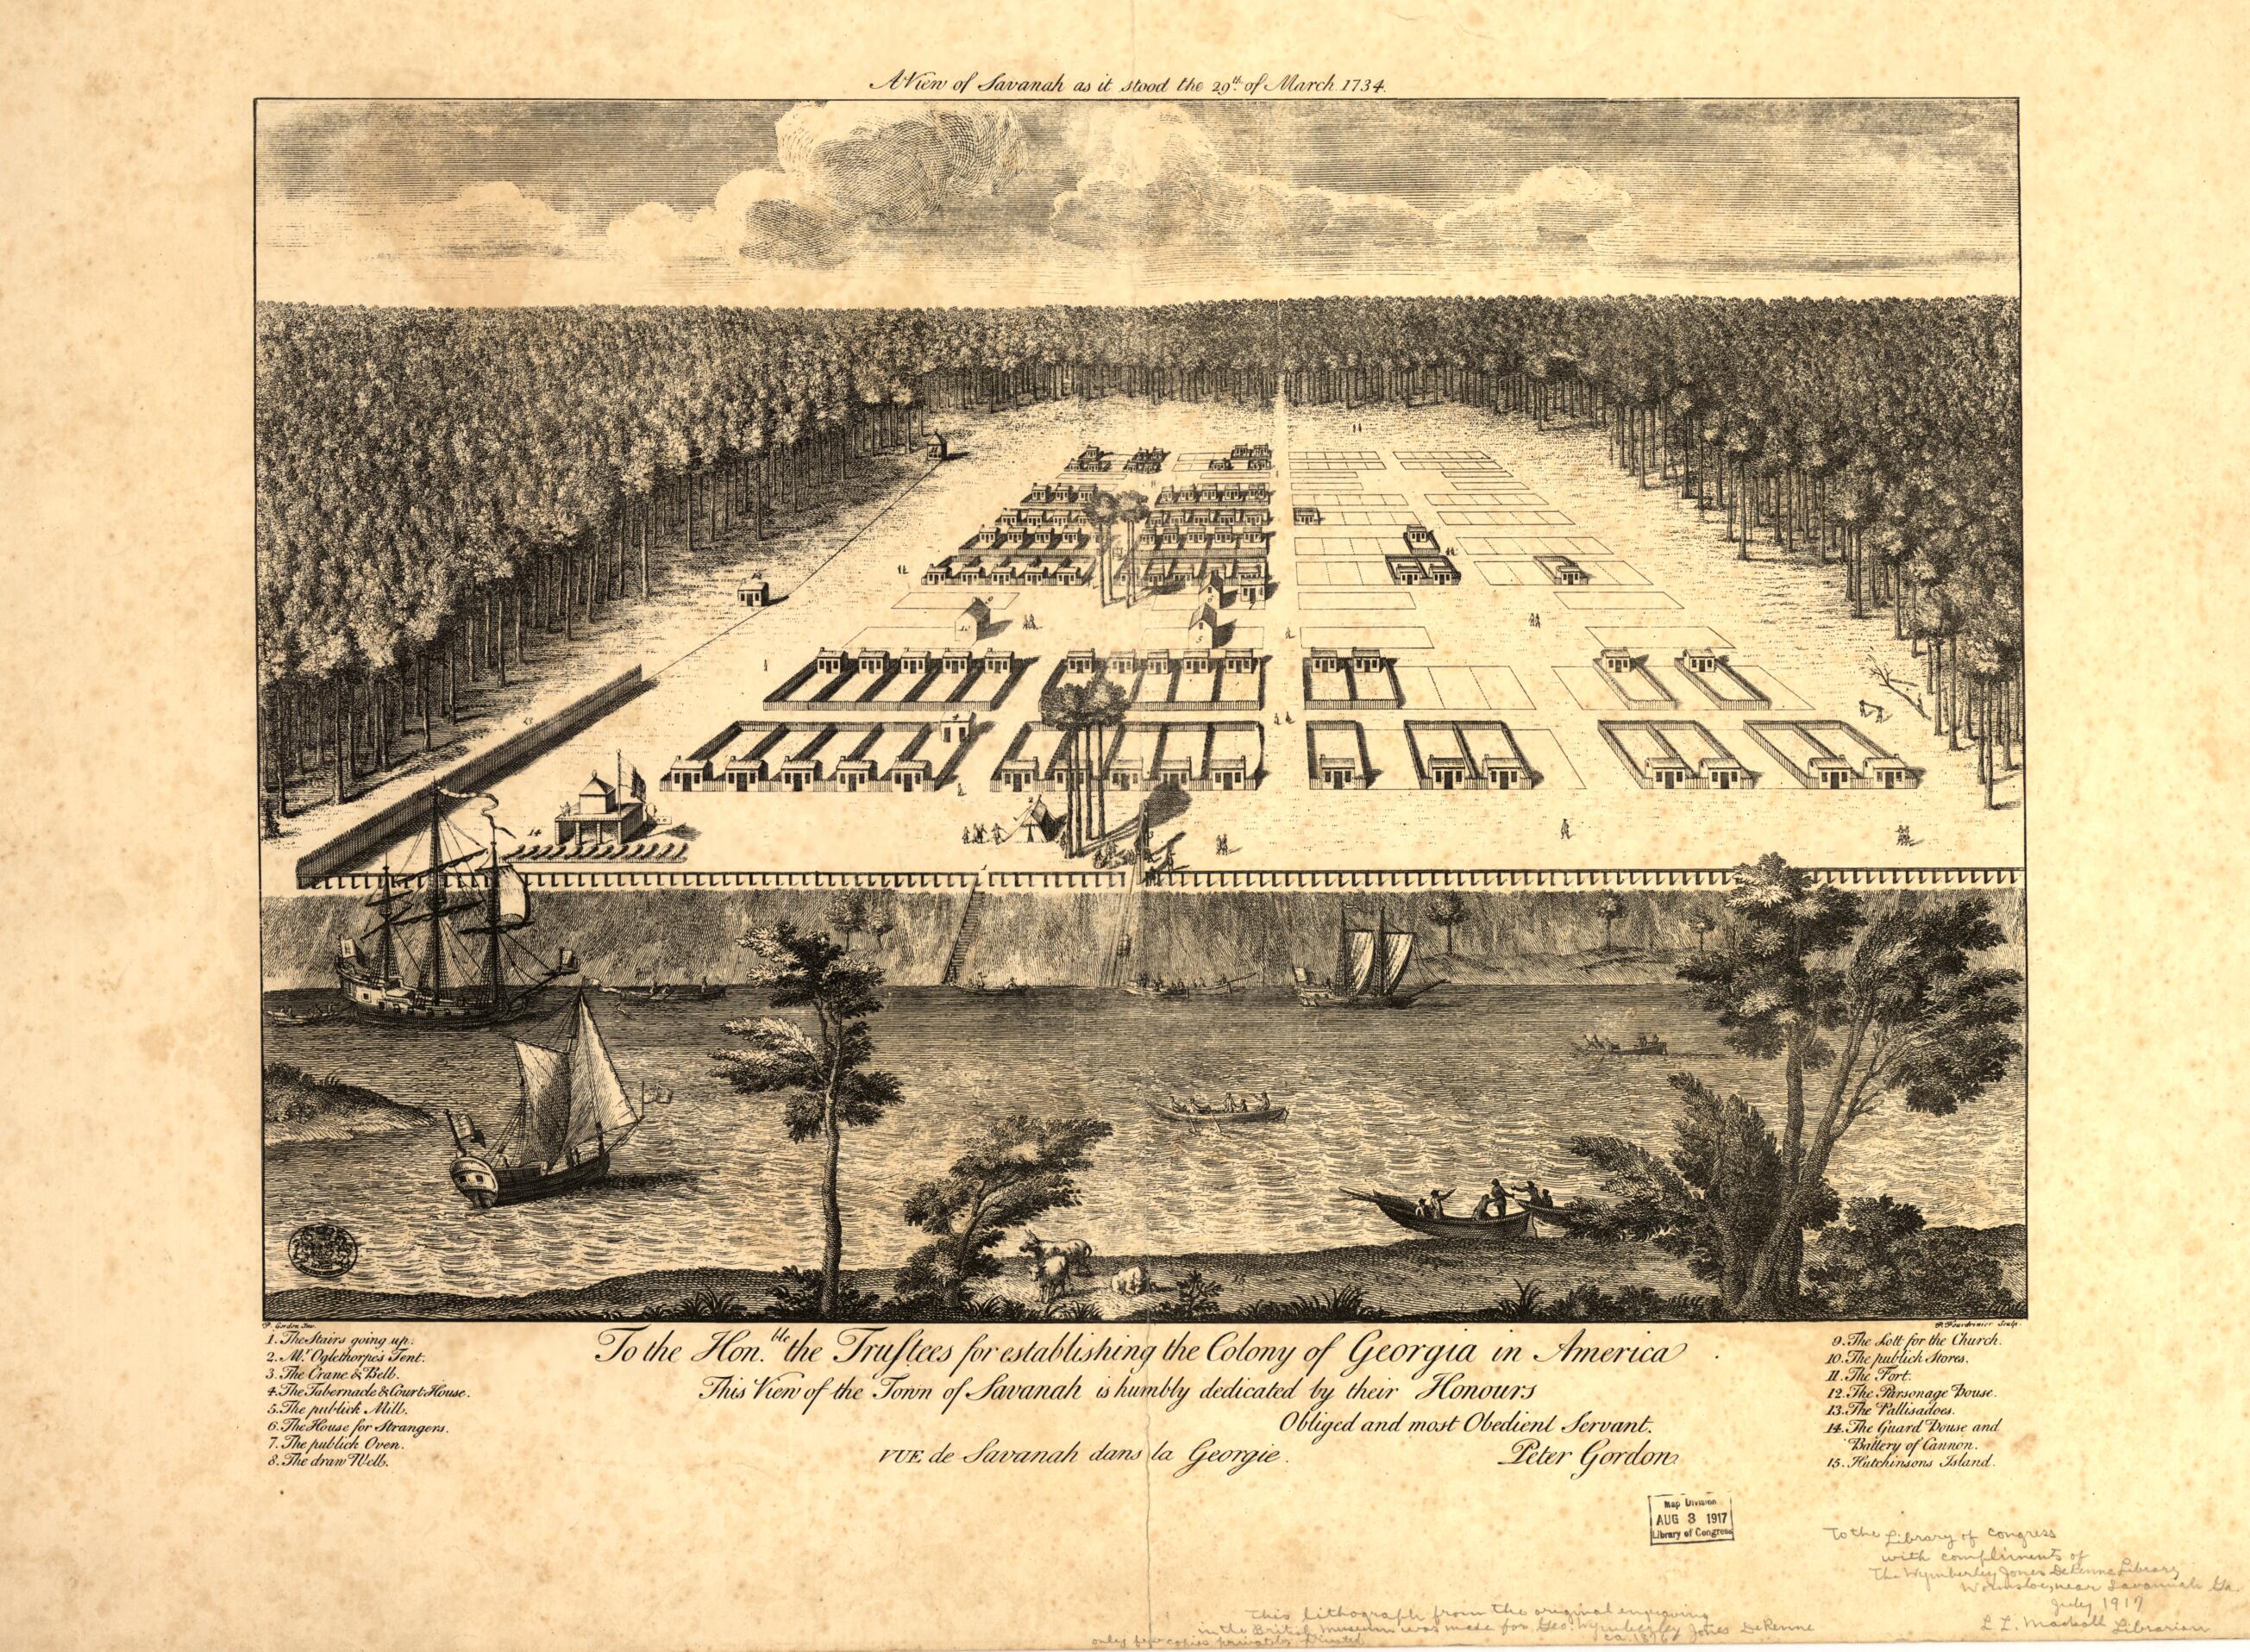 This old map of A View of Savannah As It Stood the 29th of March from 1734 was created by Peter Gordon in 1734